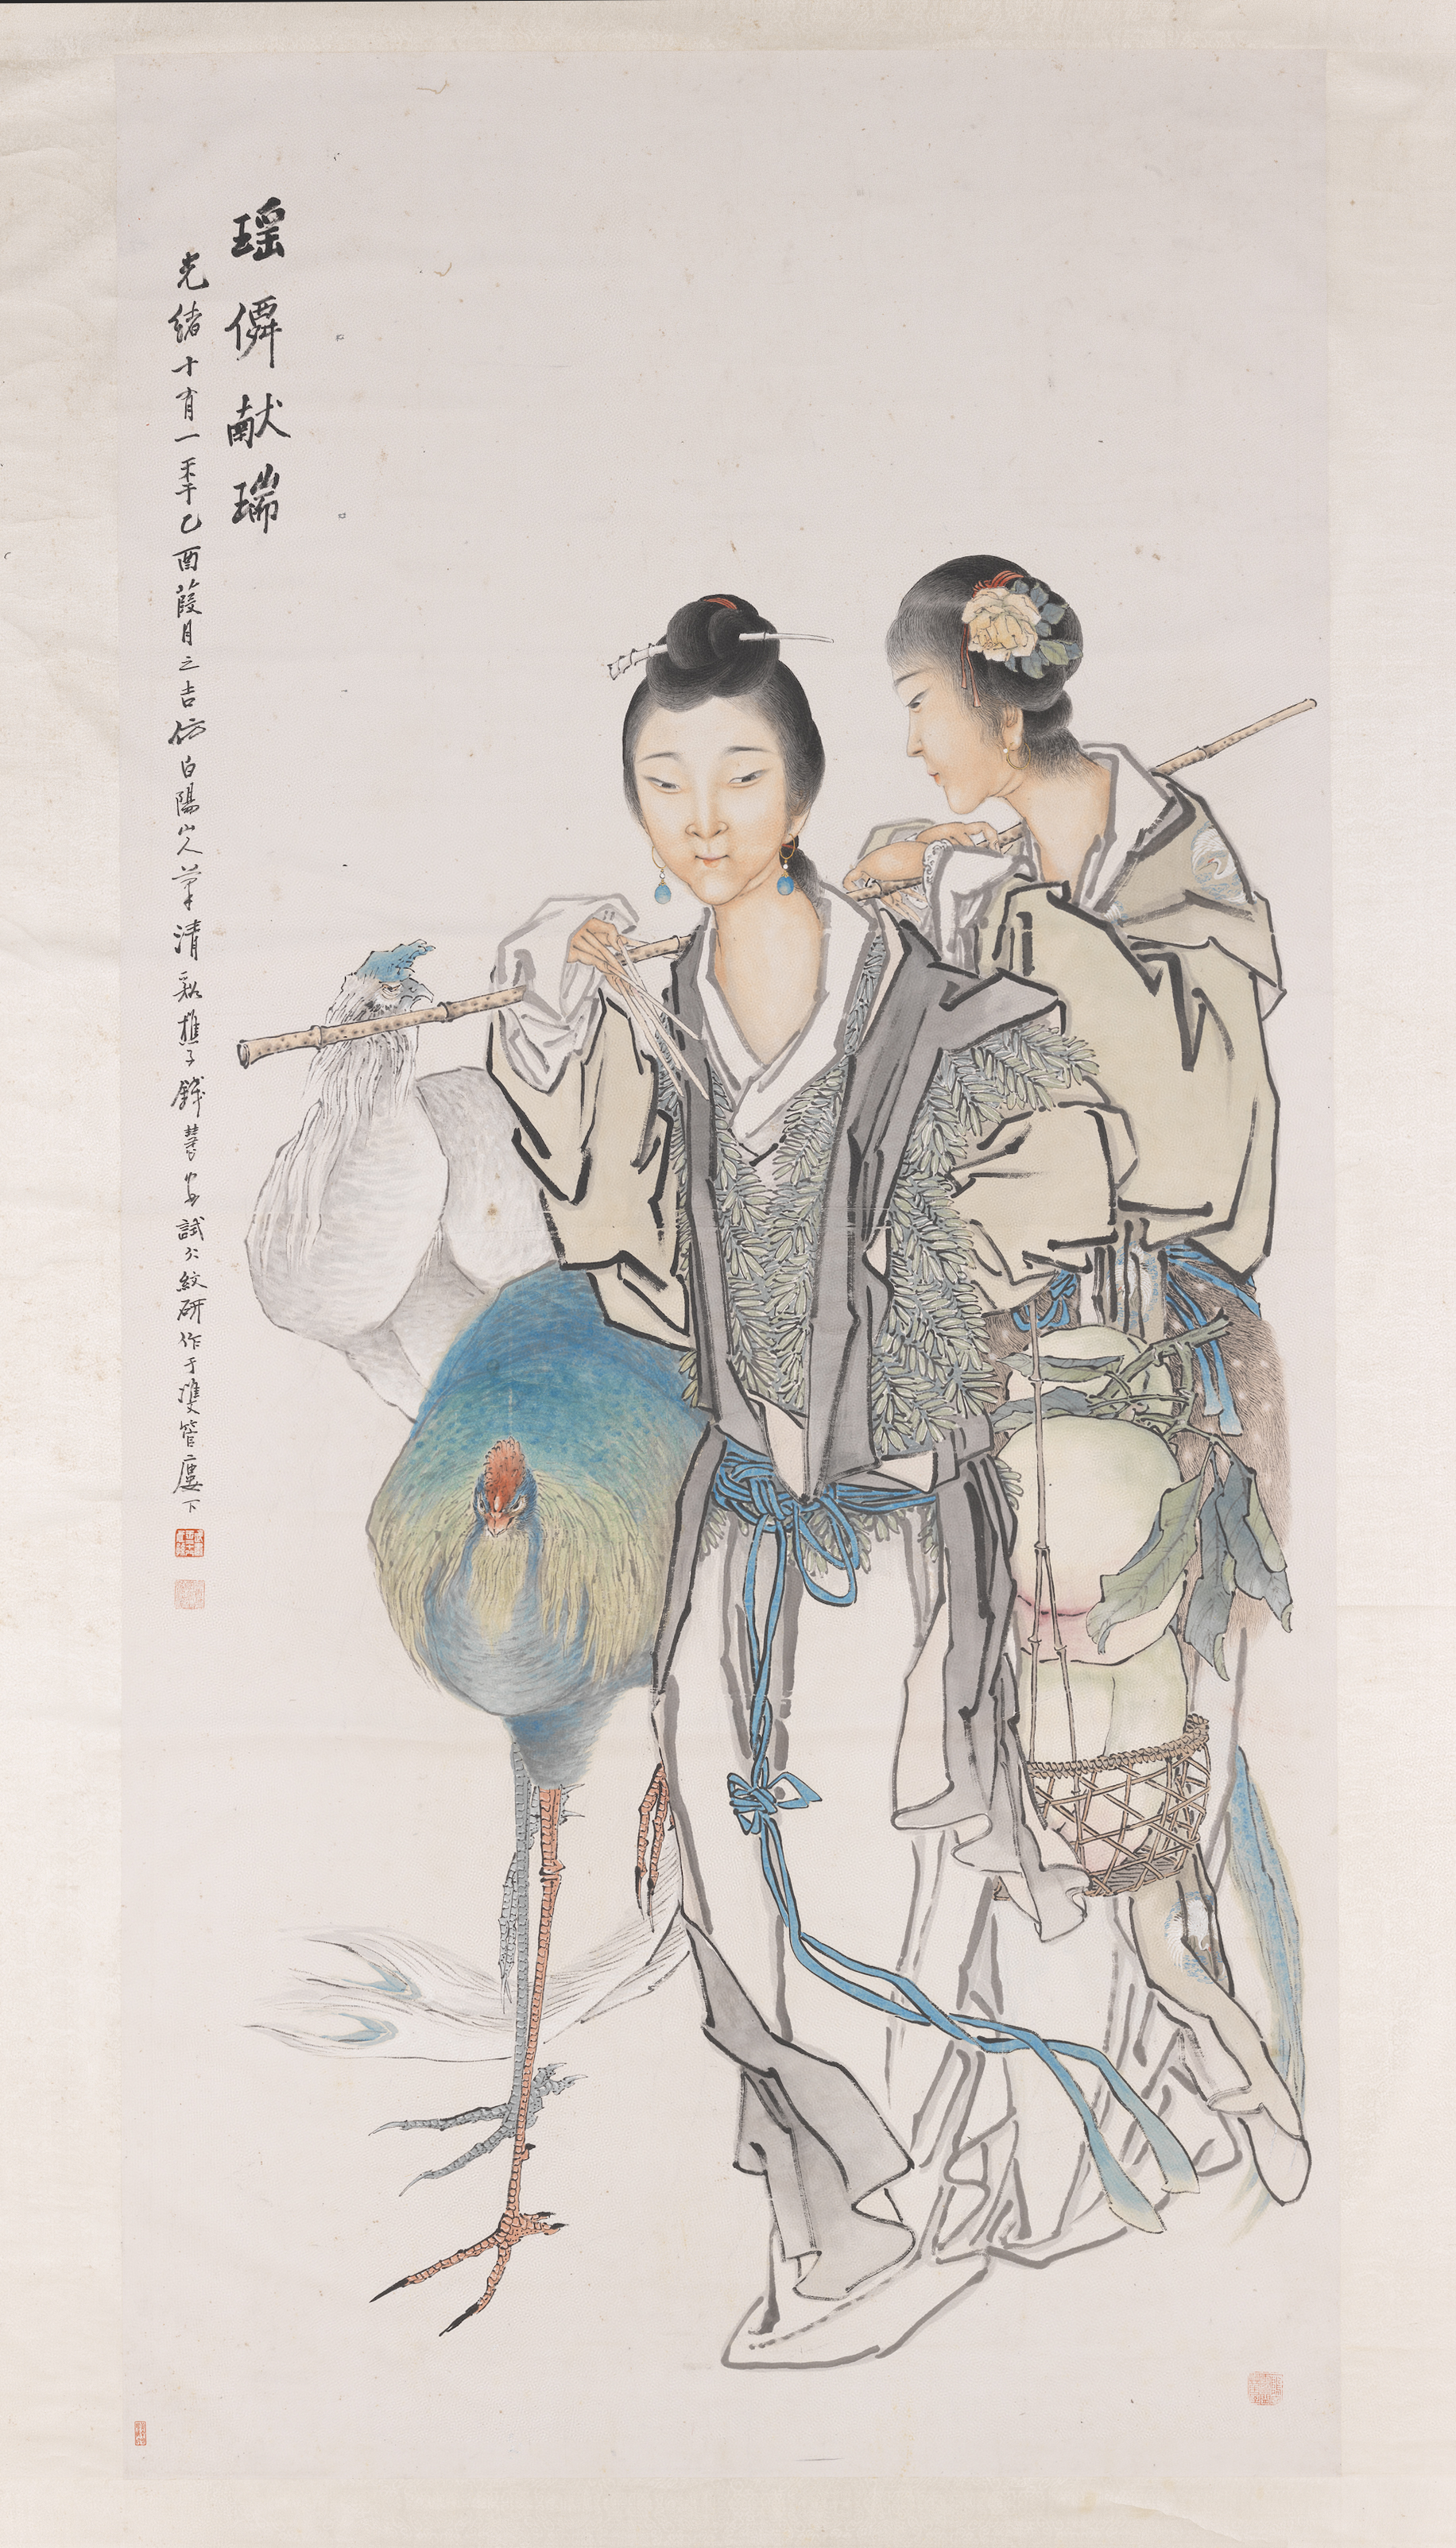 Maiden Immortals Offering Auspicious Gifts, Qian Hui’an (1833-1911), Qing dynasty